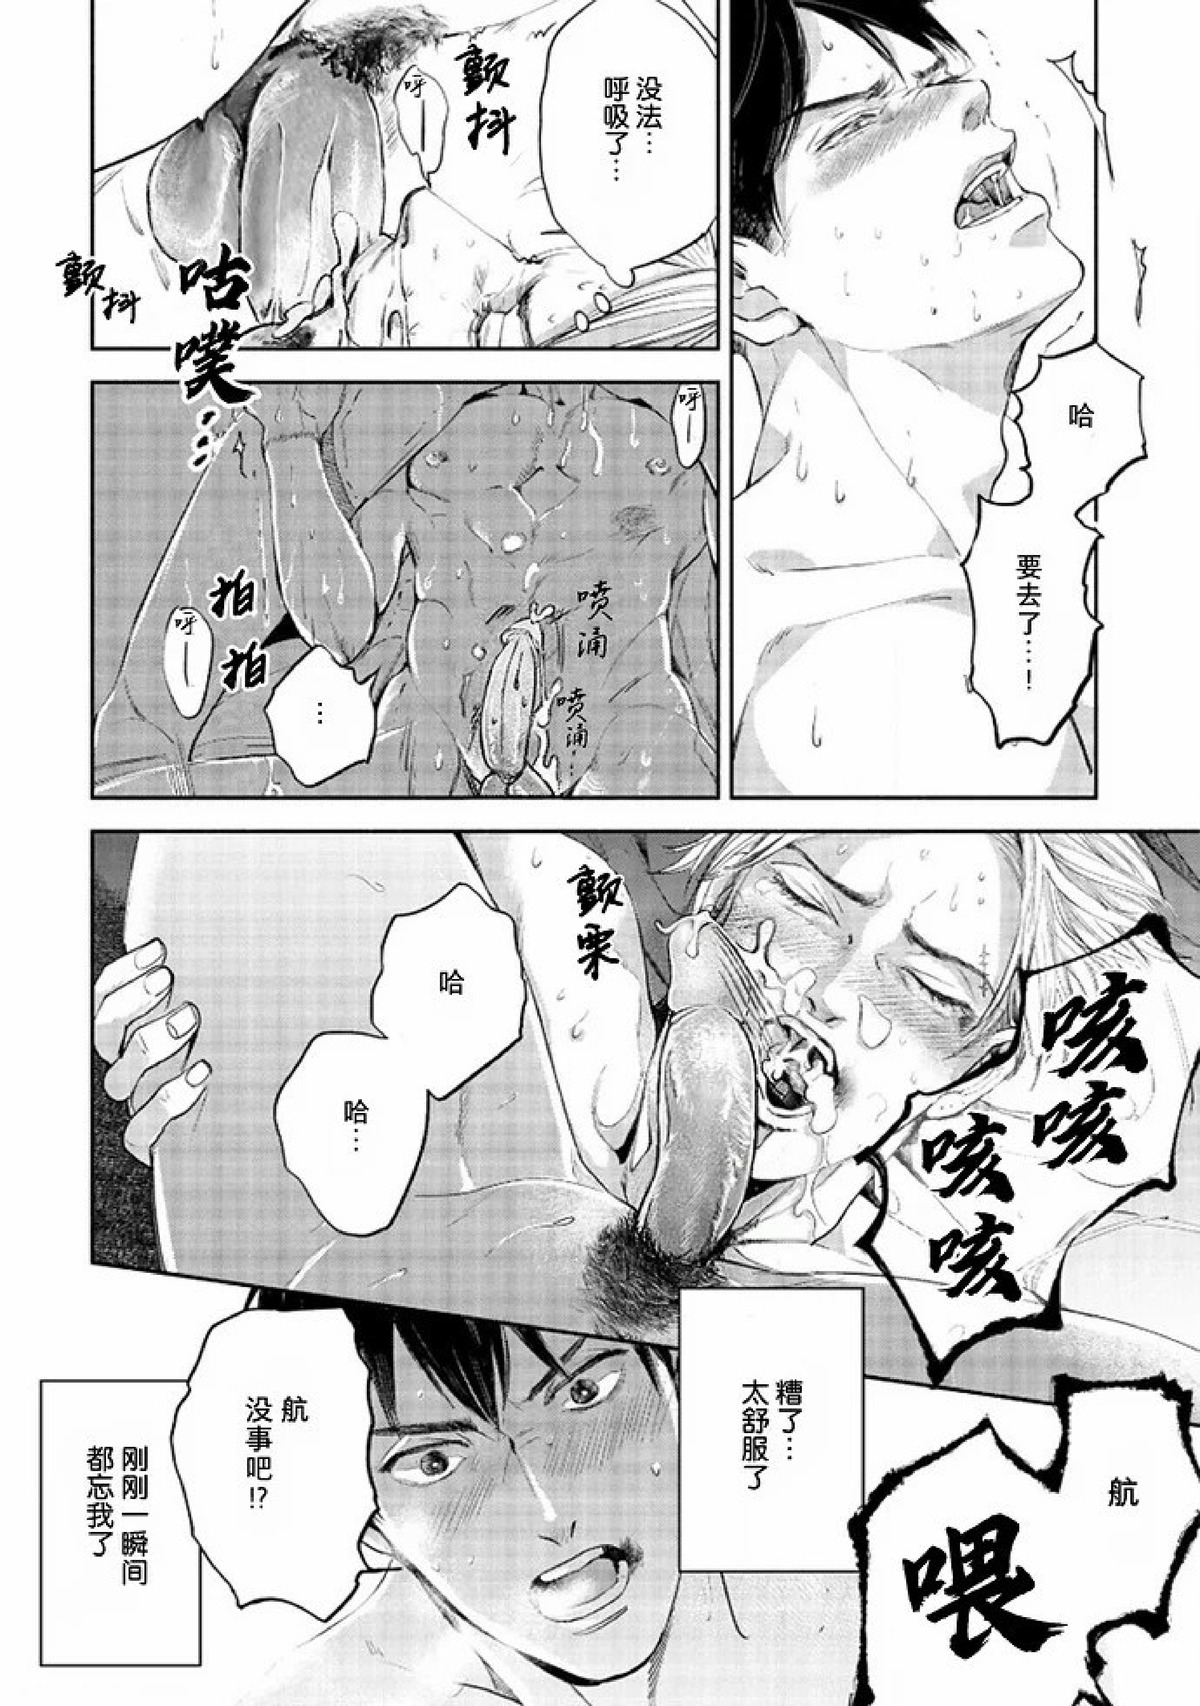 【Two sides of the same coin[耽美]】漫画-（上卷01-02）章节漫画下拉式图片-96.jpg